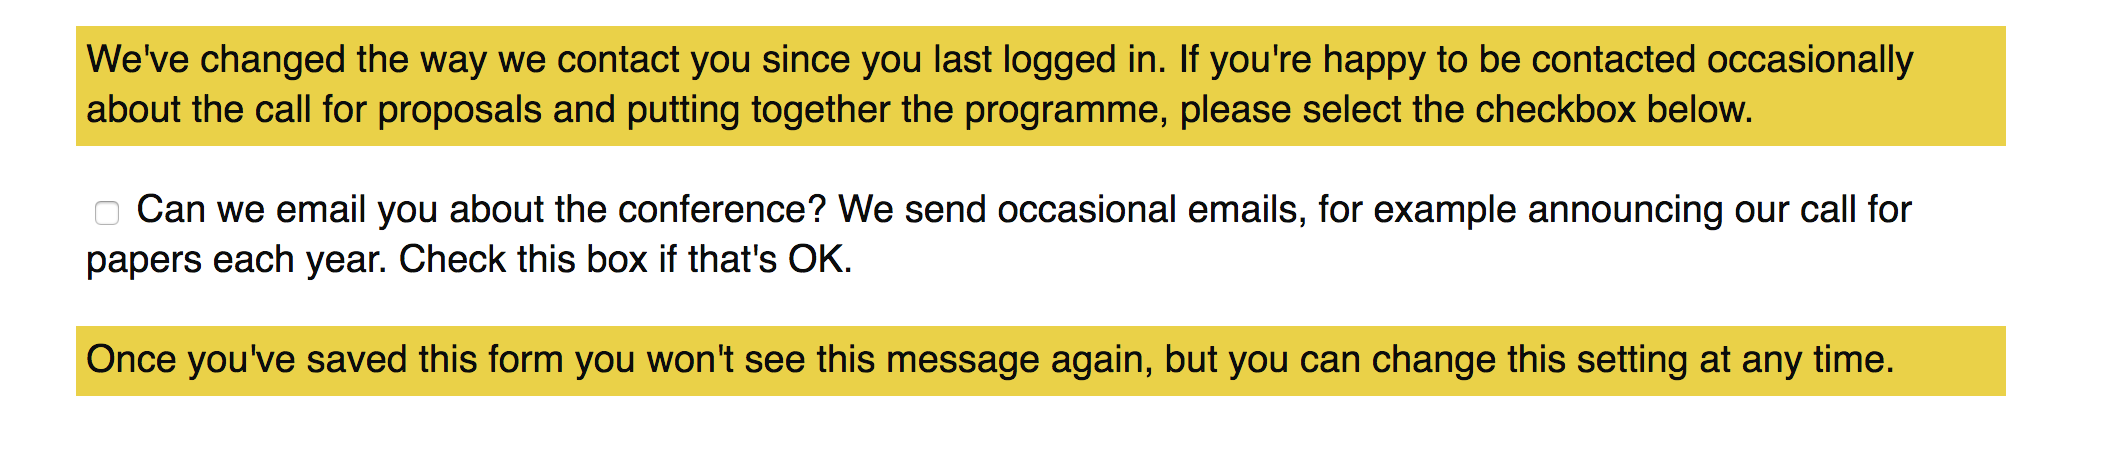 Checkbox with label text "Can we email you about the conference? We send occasional emails, for example announcing our call for papers each year. Check this box if that's OK"